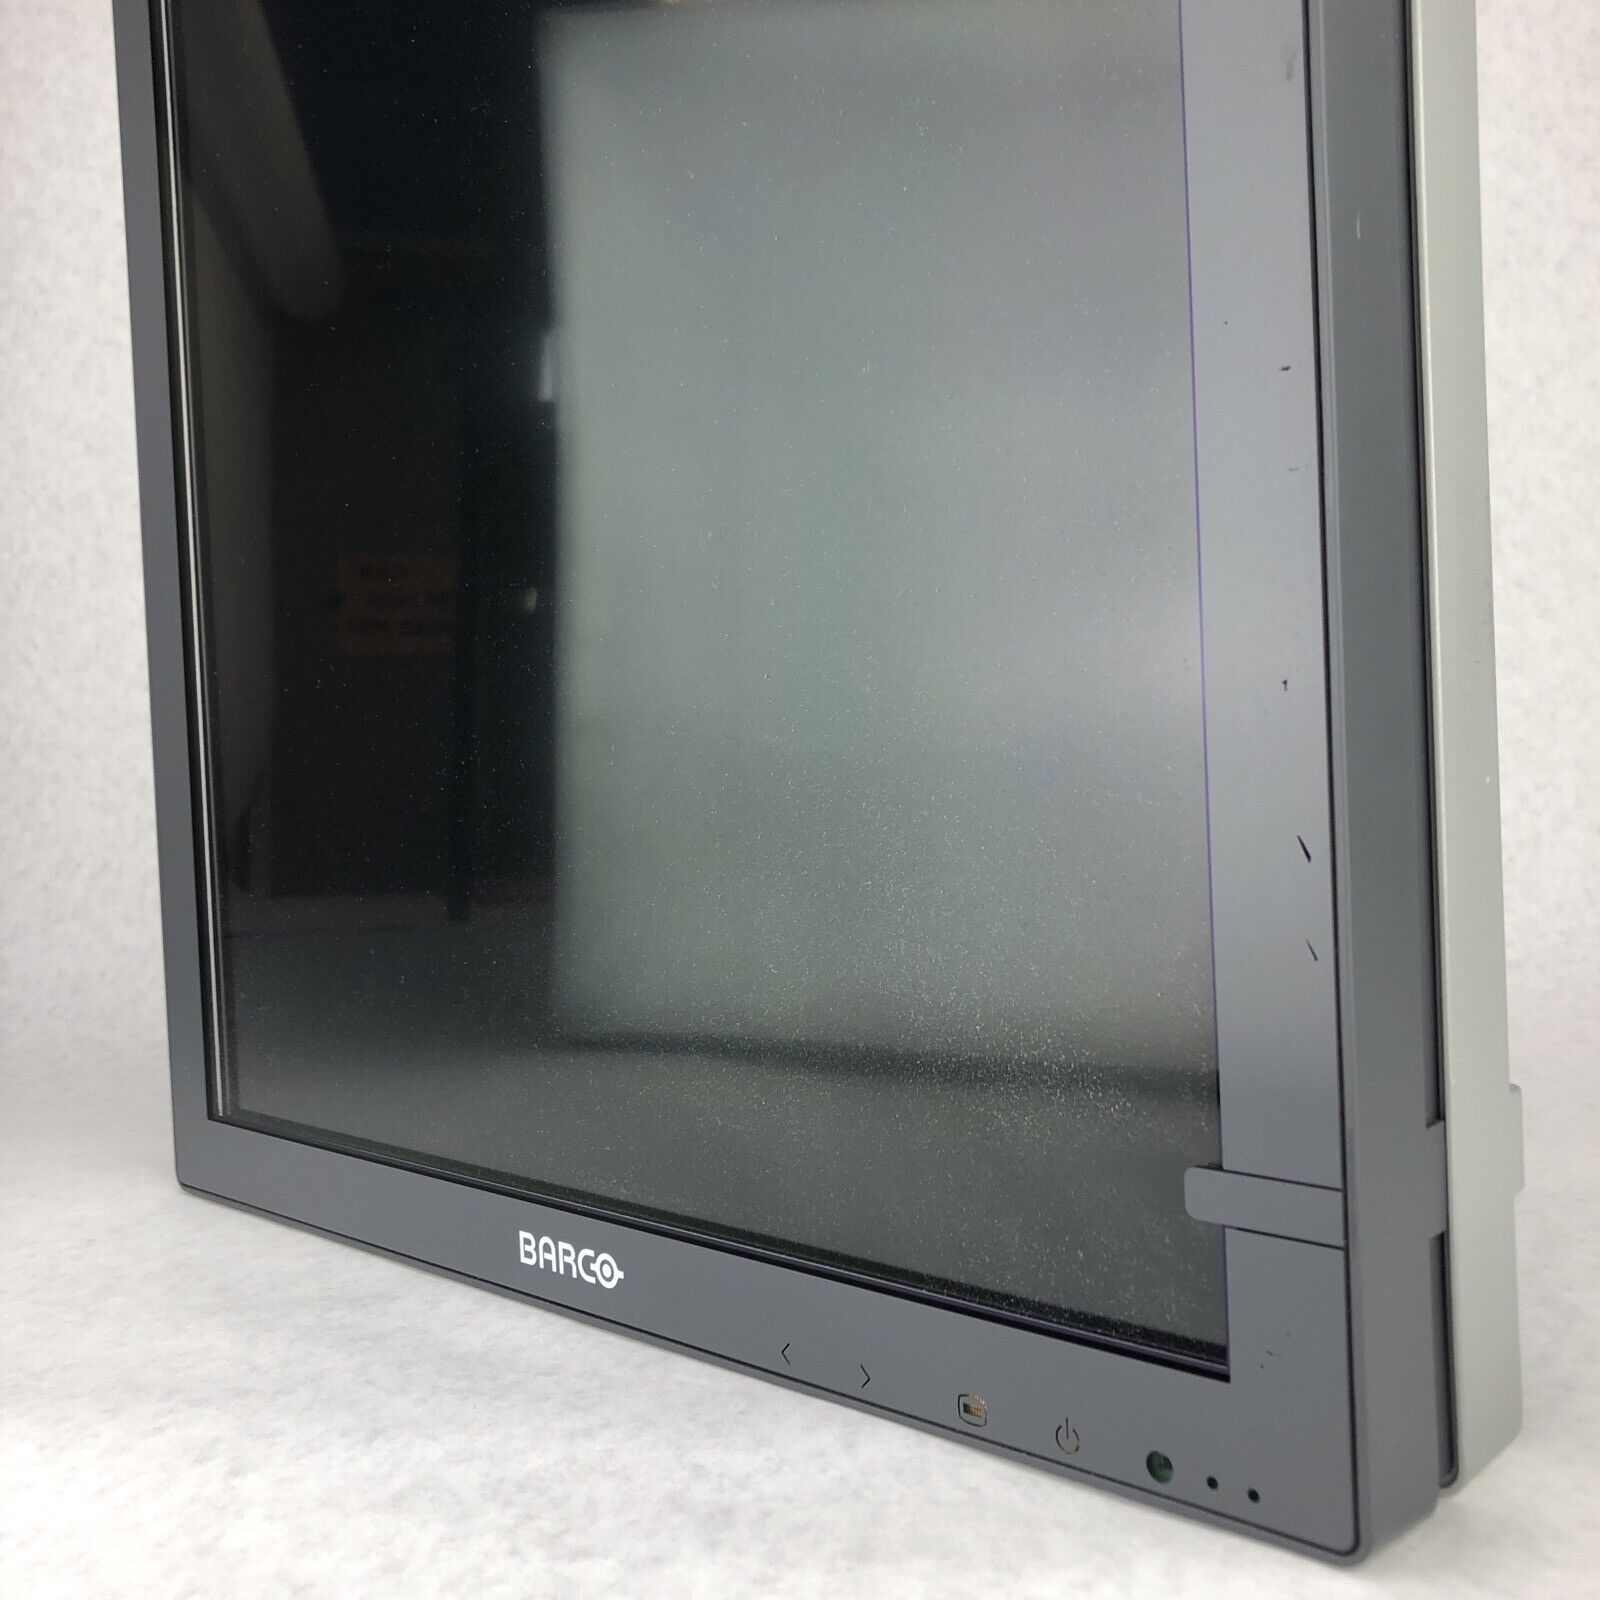 Barco MDCG-3120 20" Grayscale Diagnostic Display K9301362B No Stand No AC Pwr